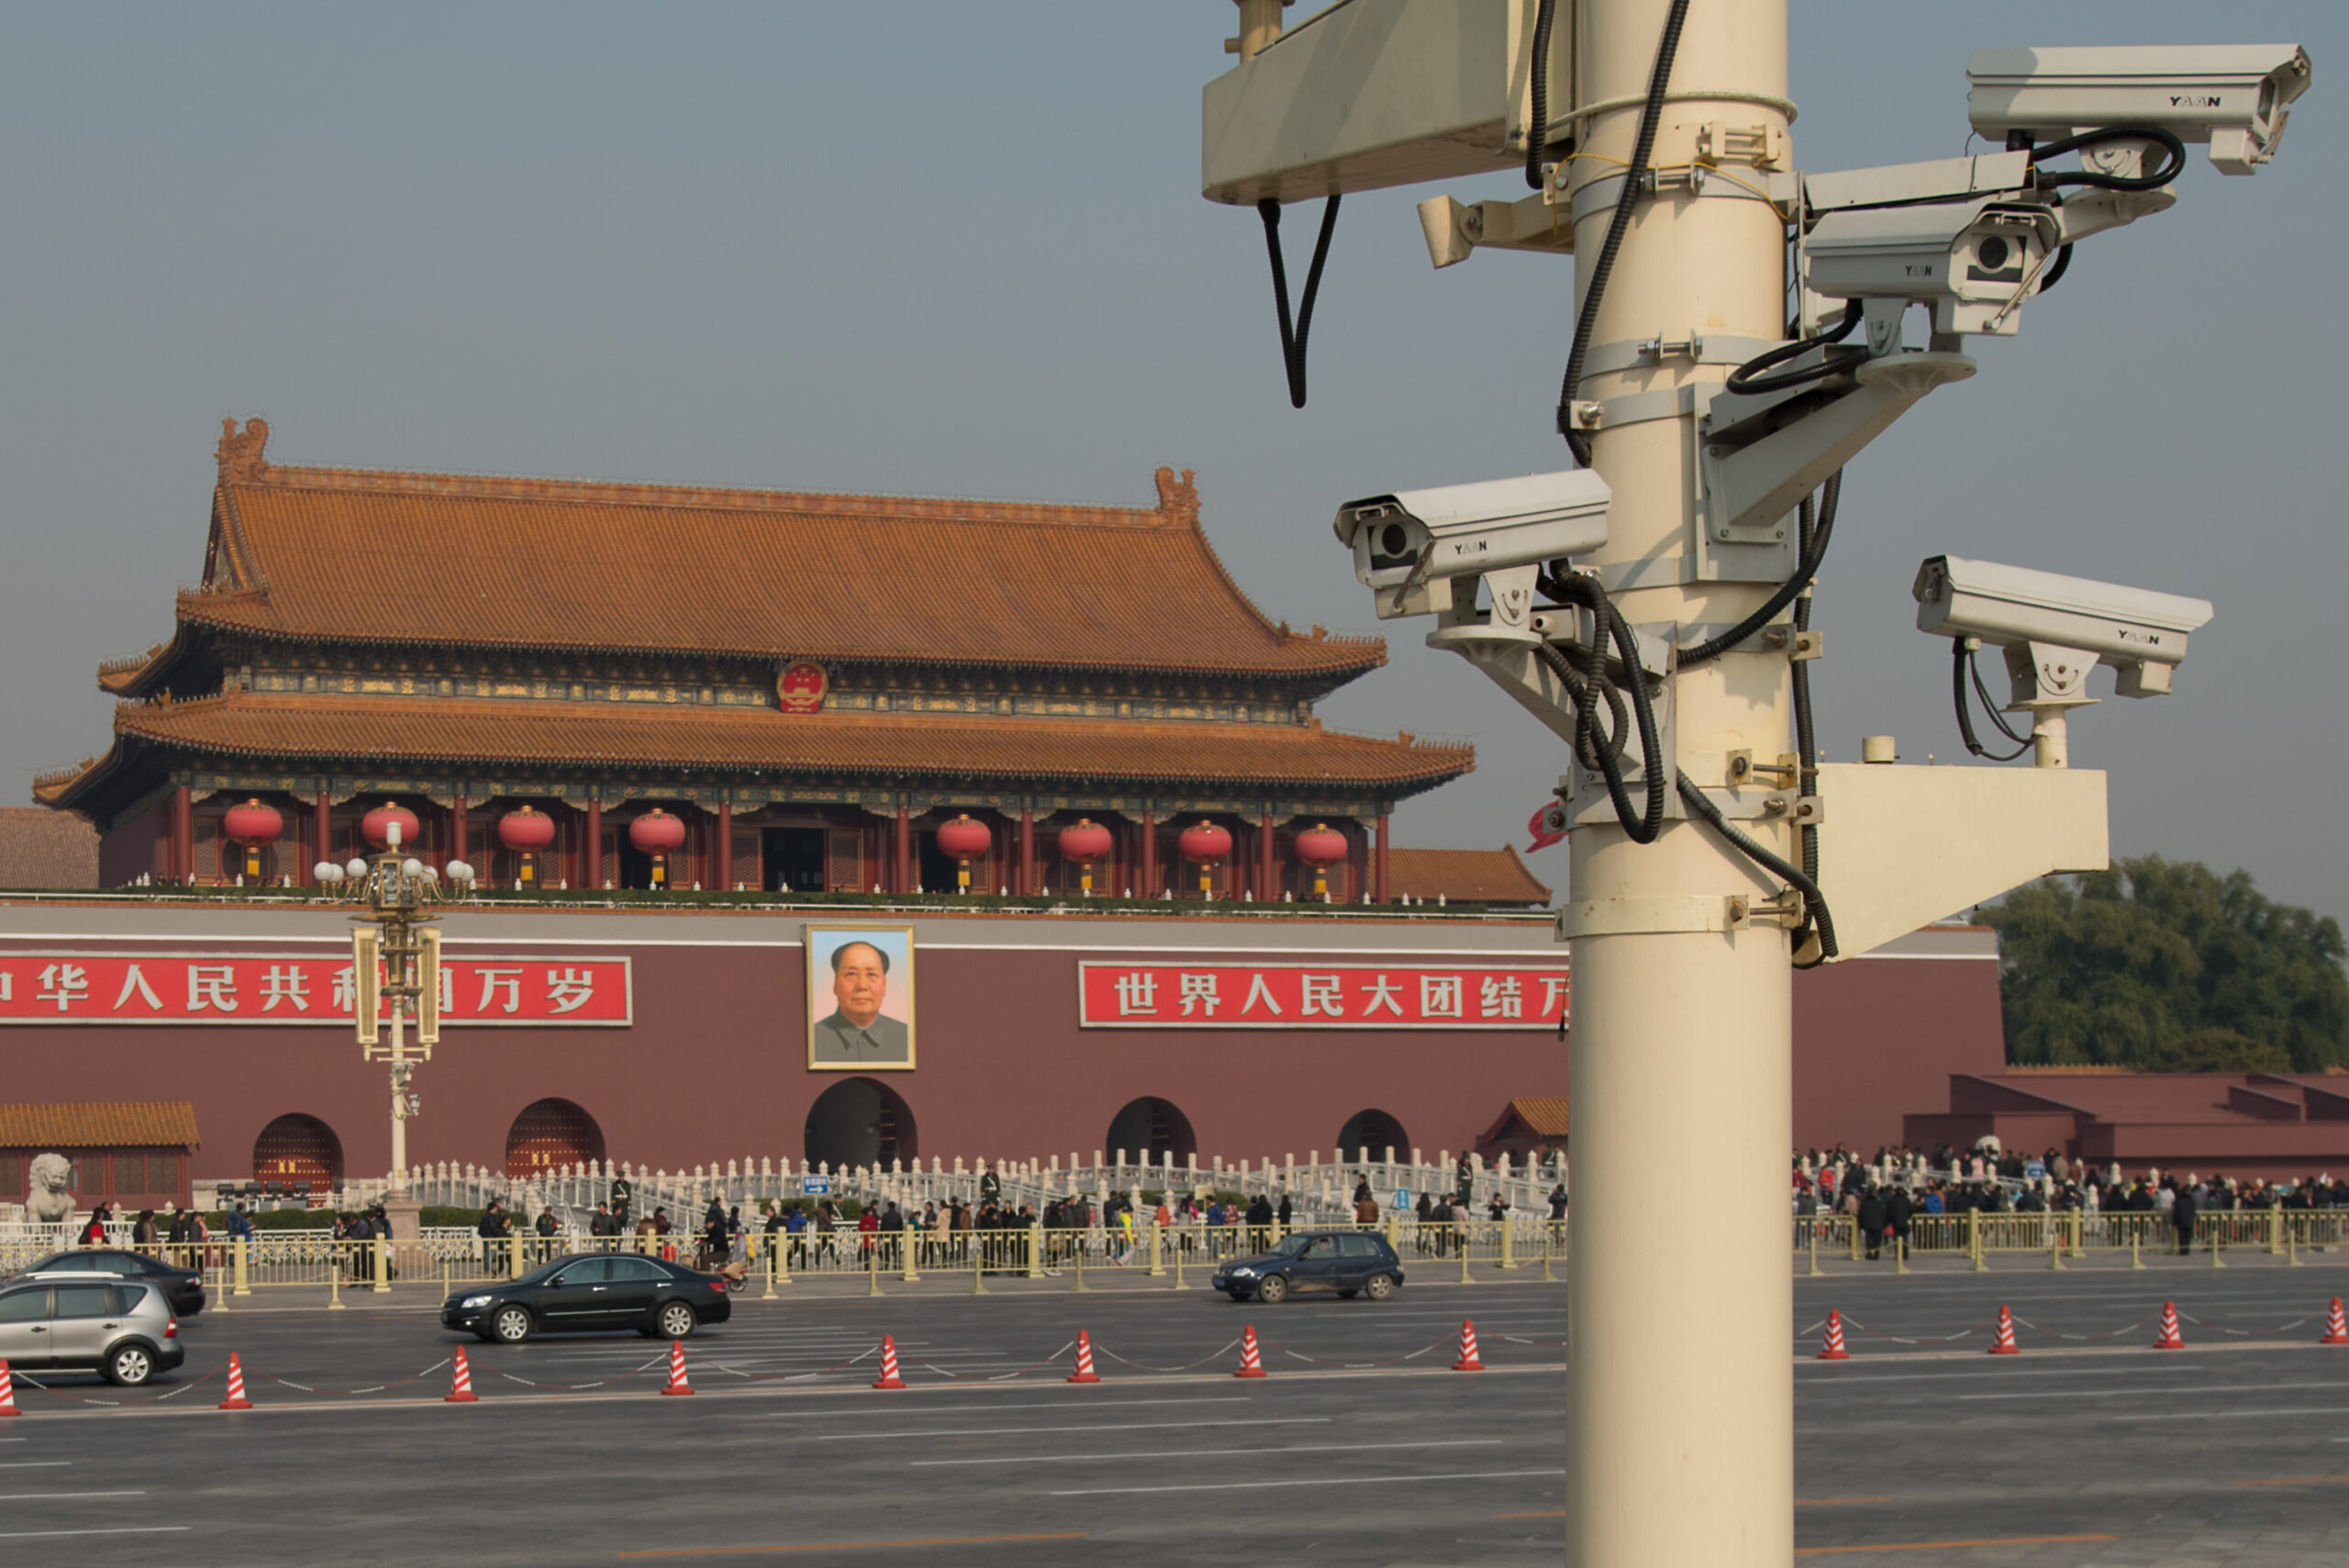 Surveillance cameras looking out over Tiananmen Square in Beijing, China. There is a distant poster of Mao Zedong.